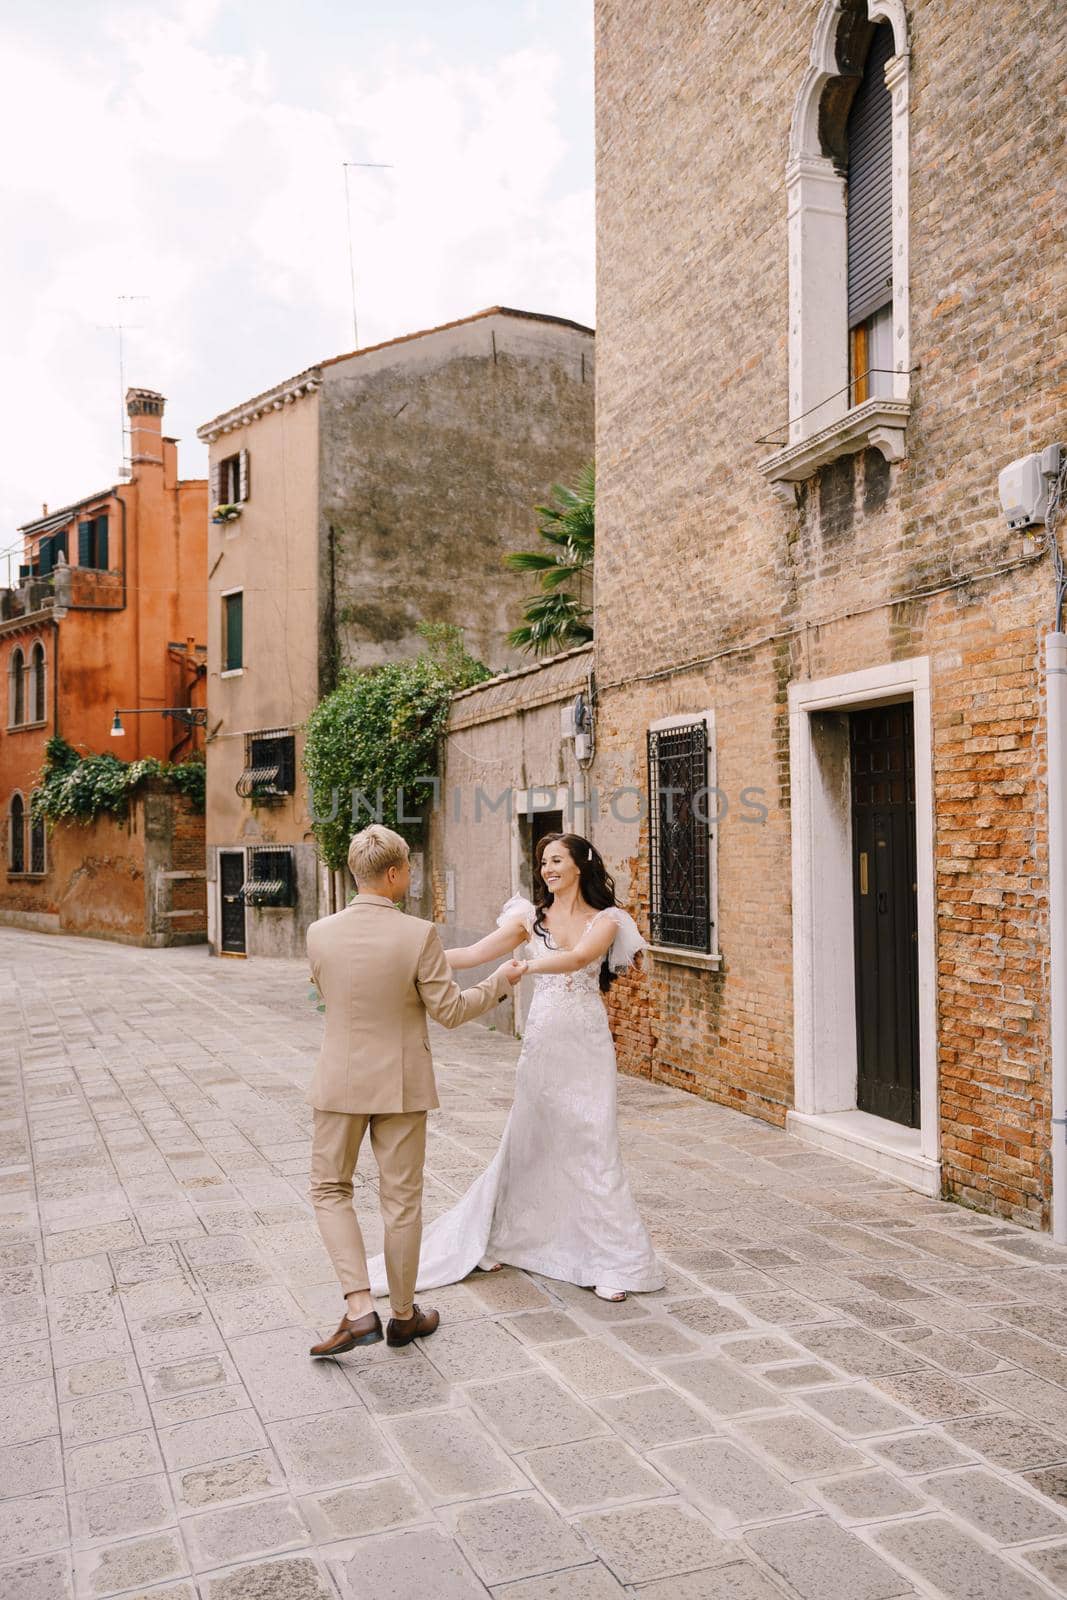 Italy wedding in Venice. The bride and groom walk along the deserted streets of the city. The newlyweds hug, dance, hold hands against the backdrop of picturesque red brick houses. by Nadtochiy